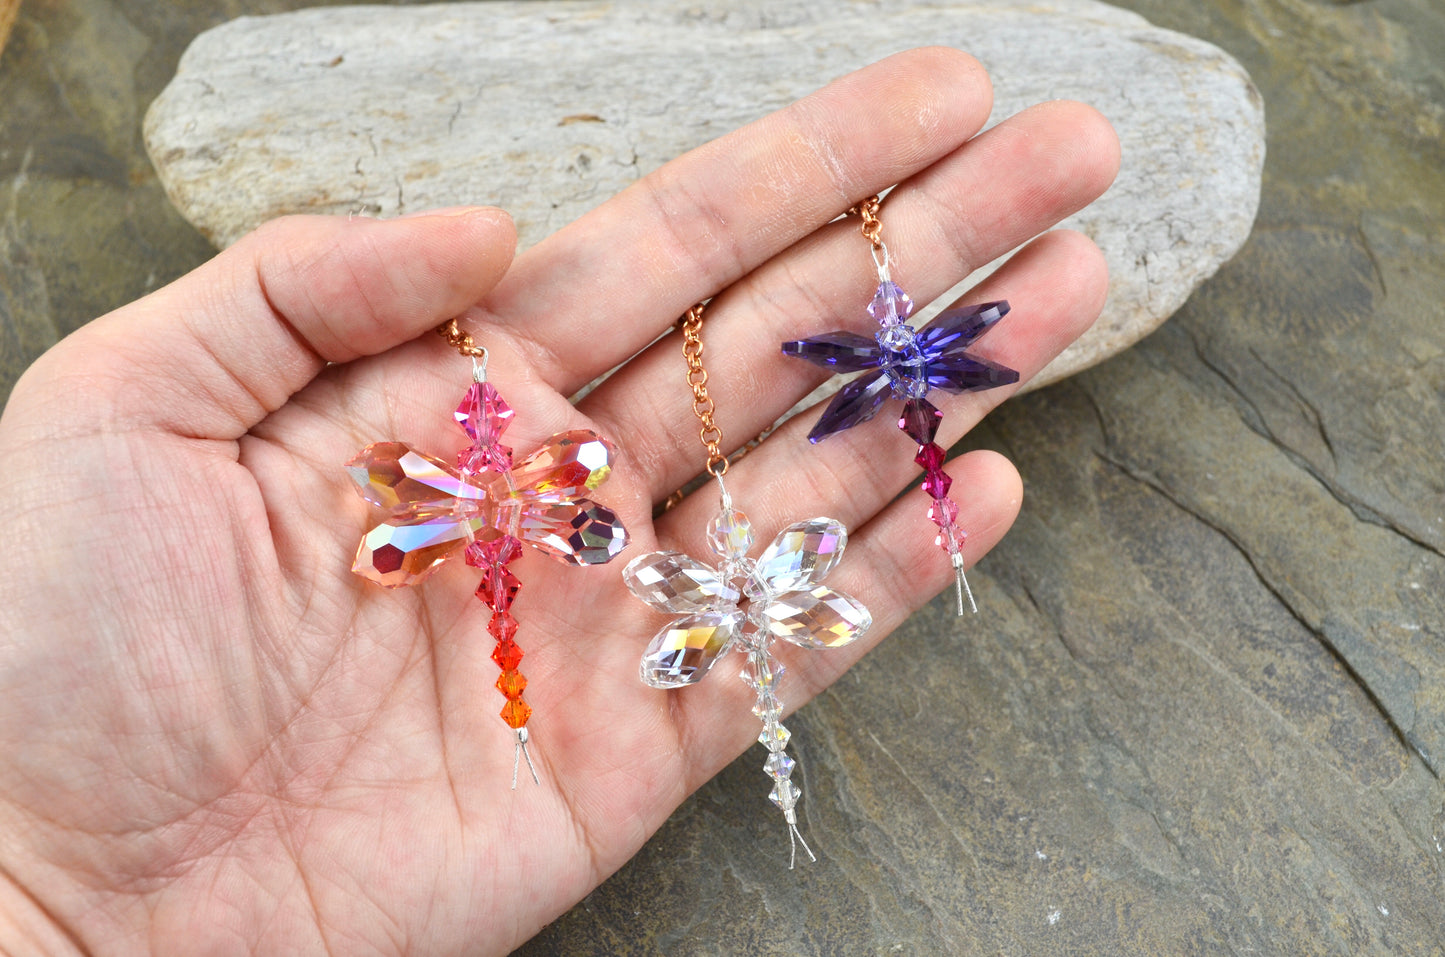 Tiny Dragonfly rear view mirror car charms: Rainbow Suncatchers made from Crystal Prisms